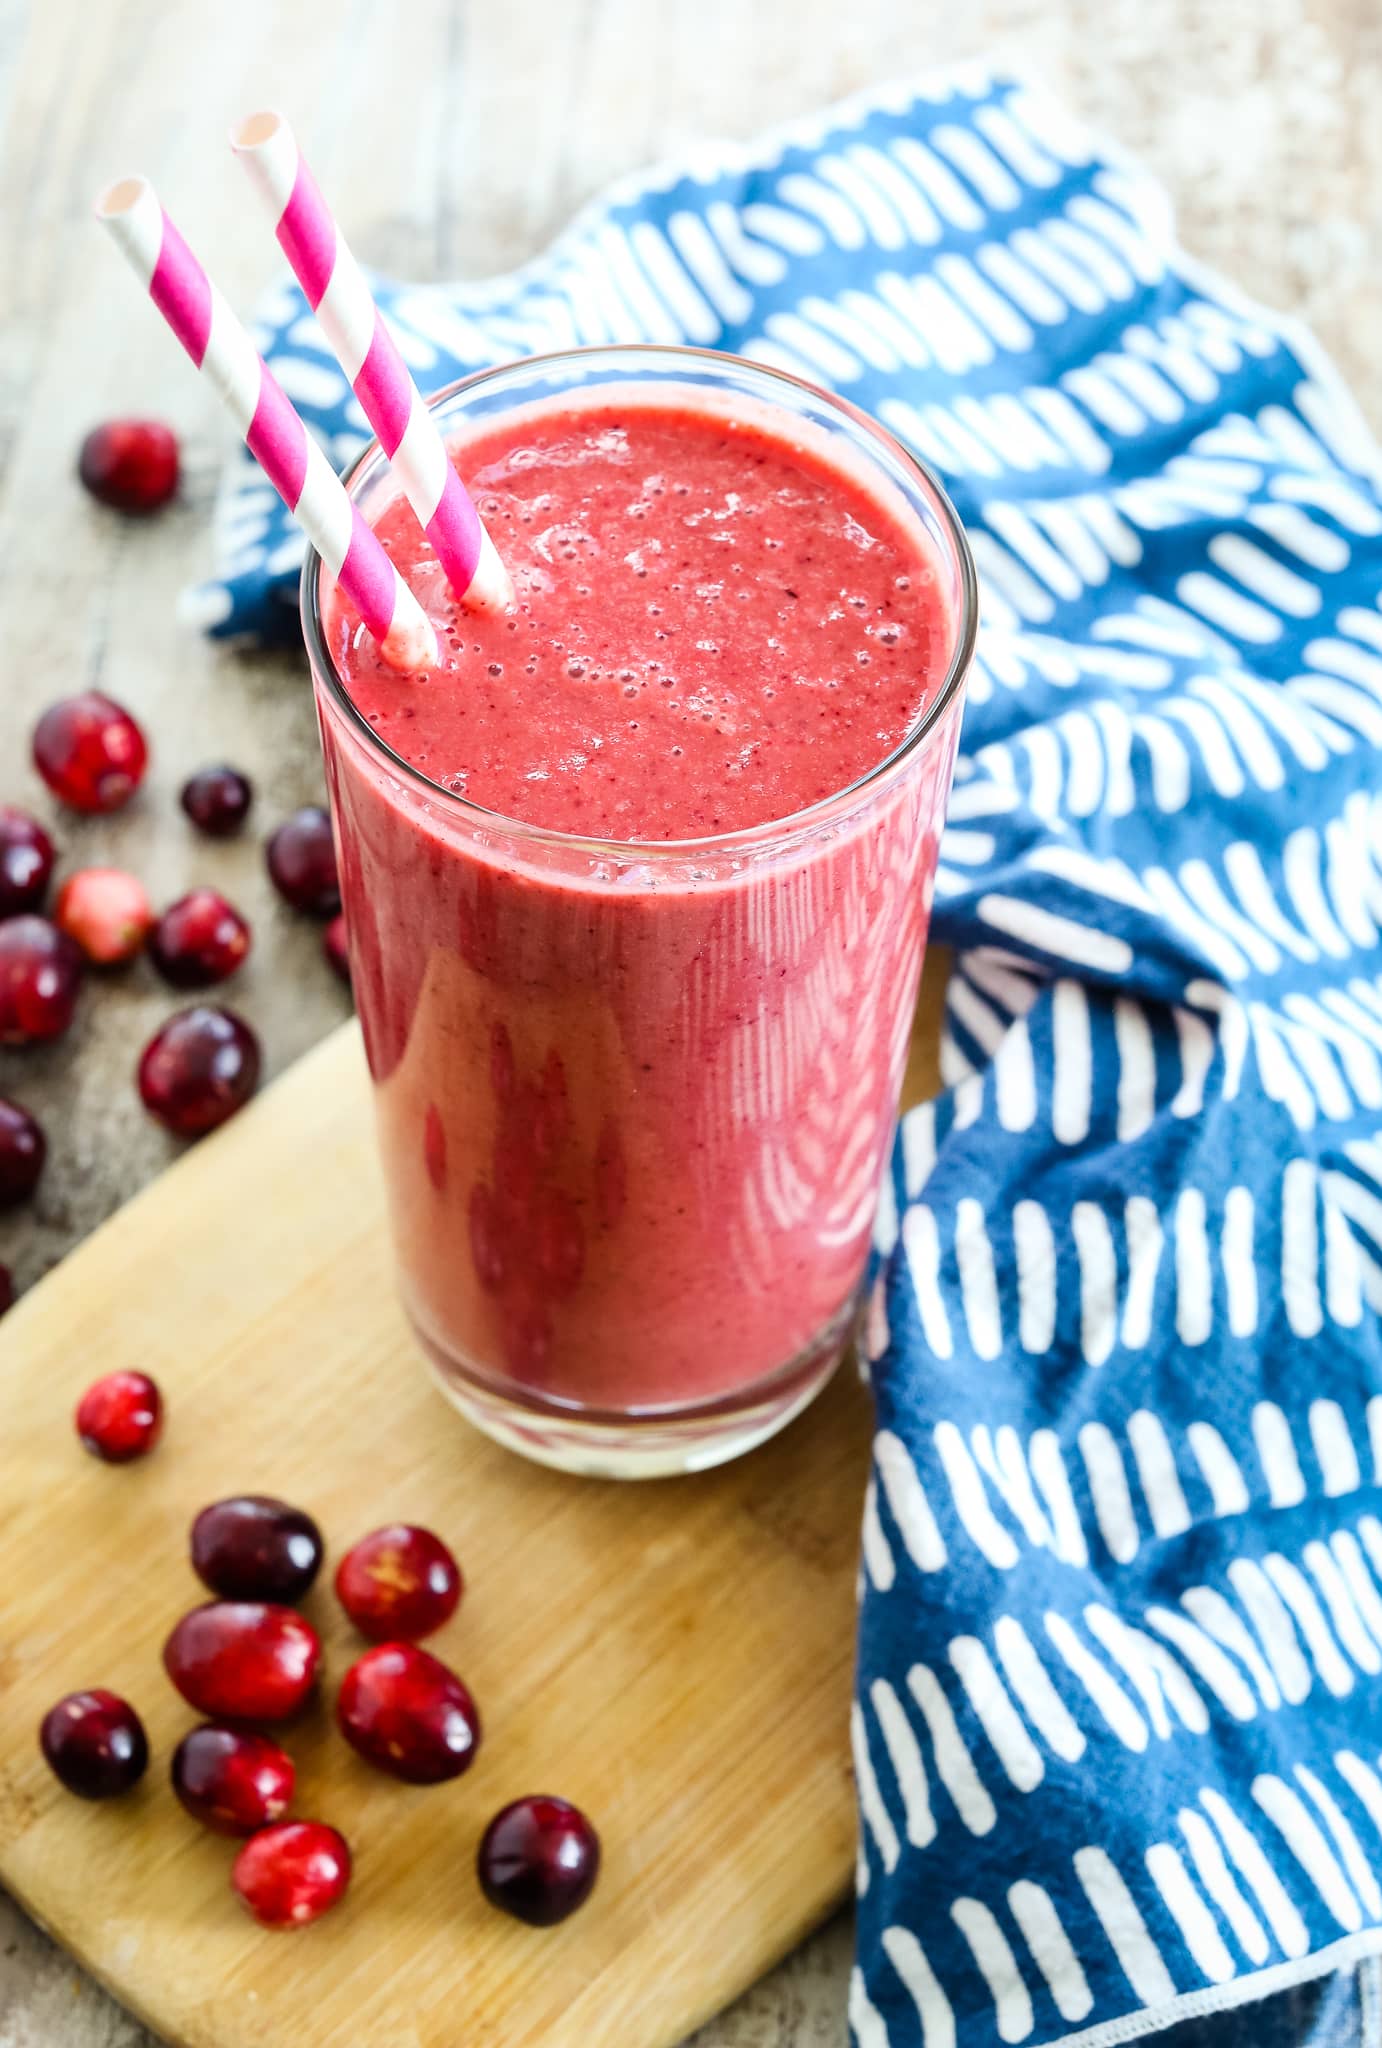 Cranberry Smoothie recipe in a tall glass with two straws and fresh cranberries on the table and a blue and white napkin